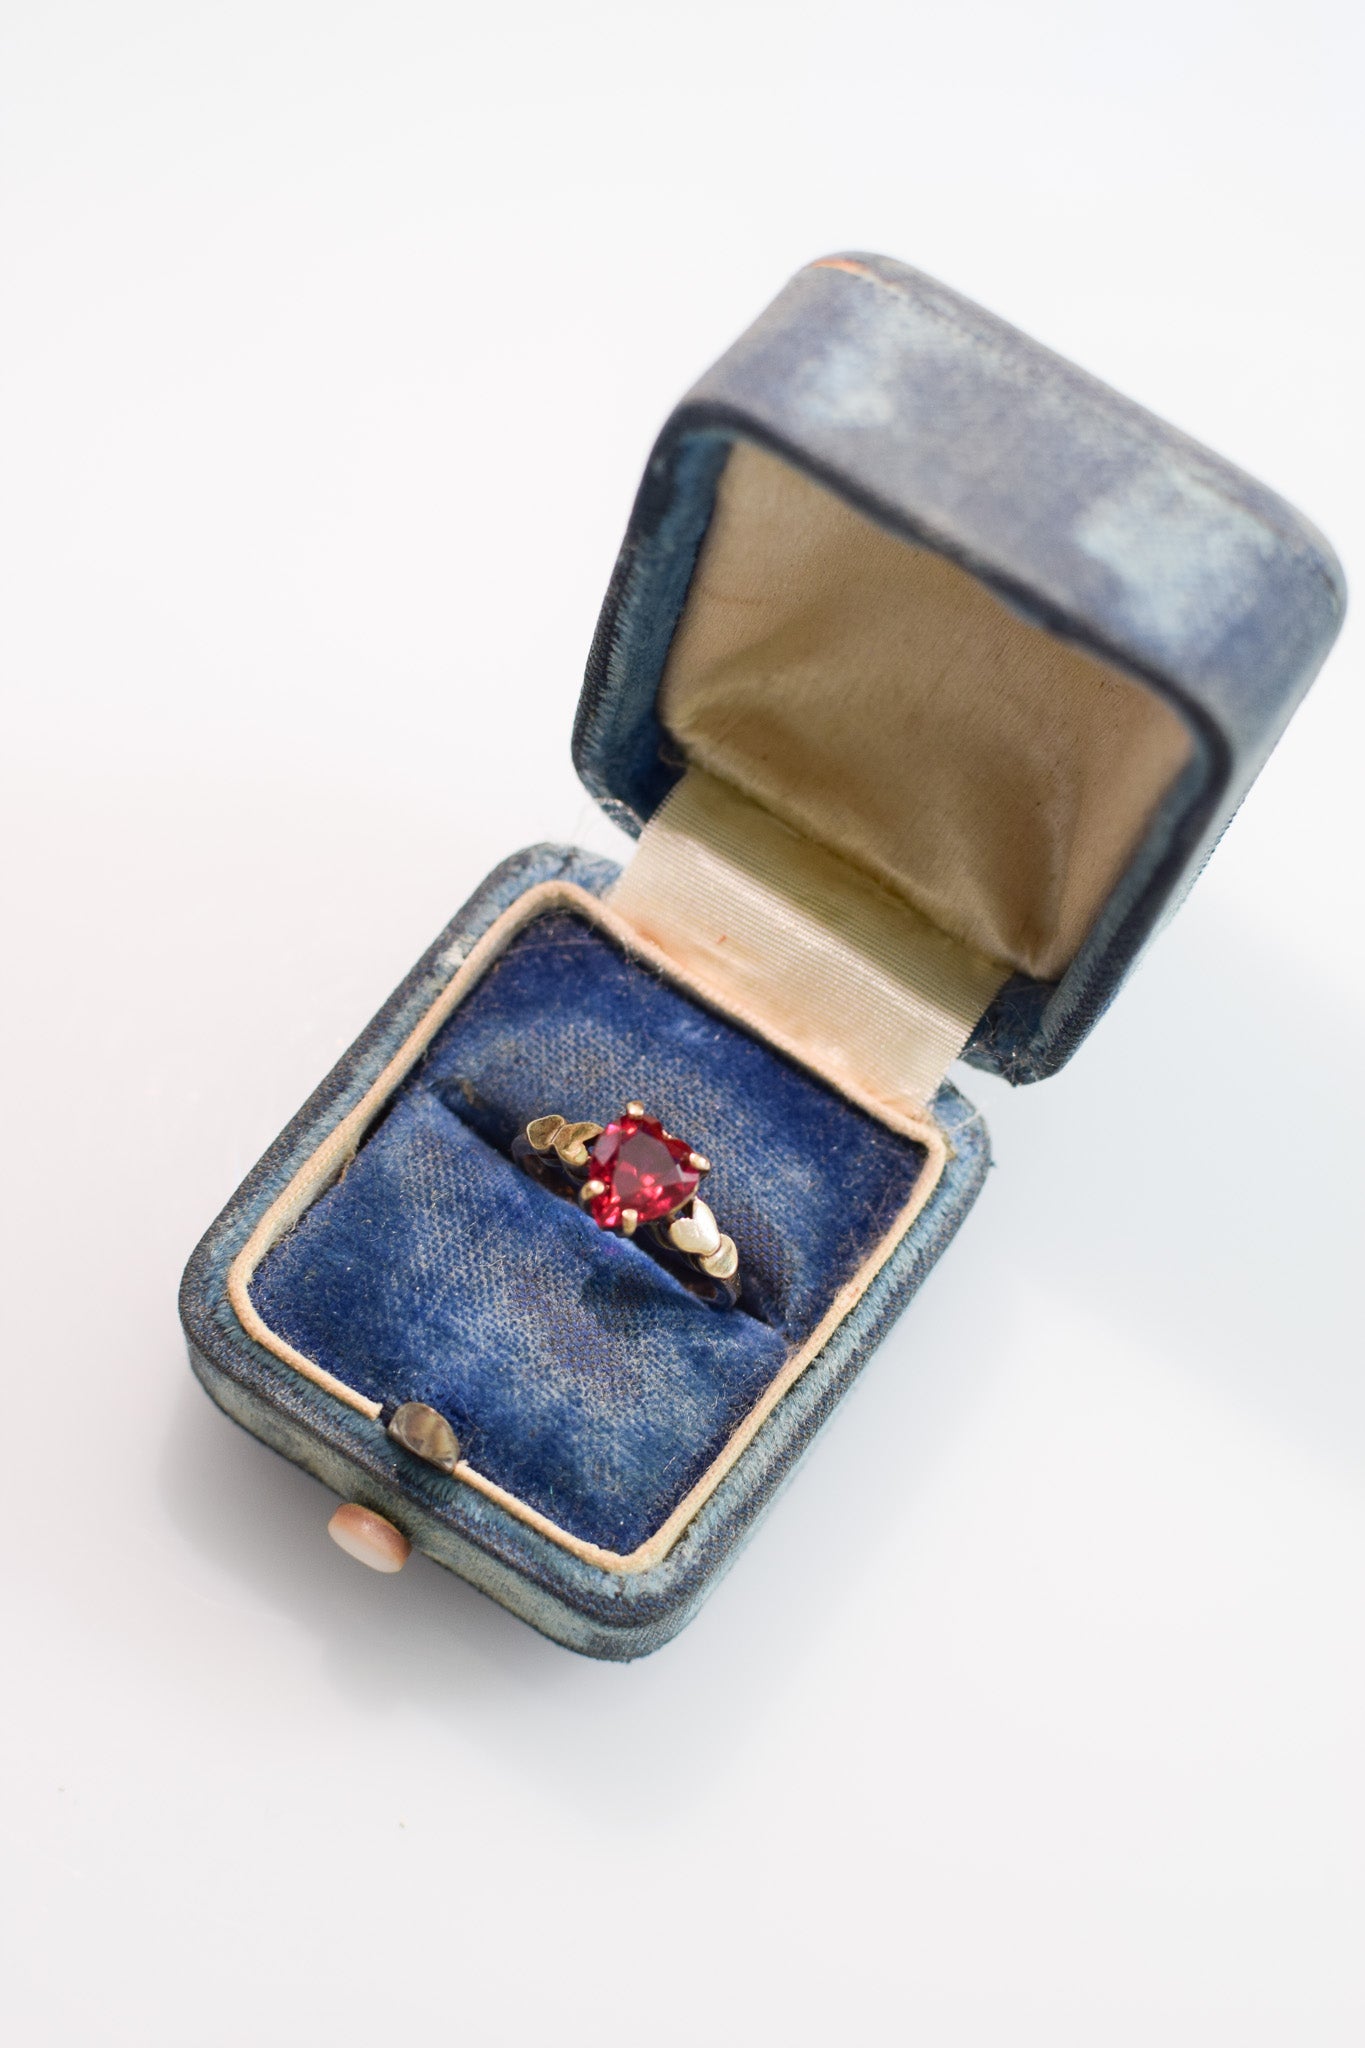 Vintage 10 KT Gold and Ruby Heart Ring | US 4.5